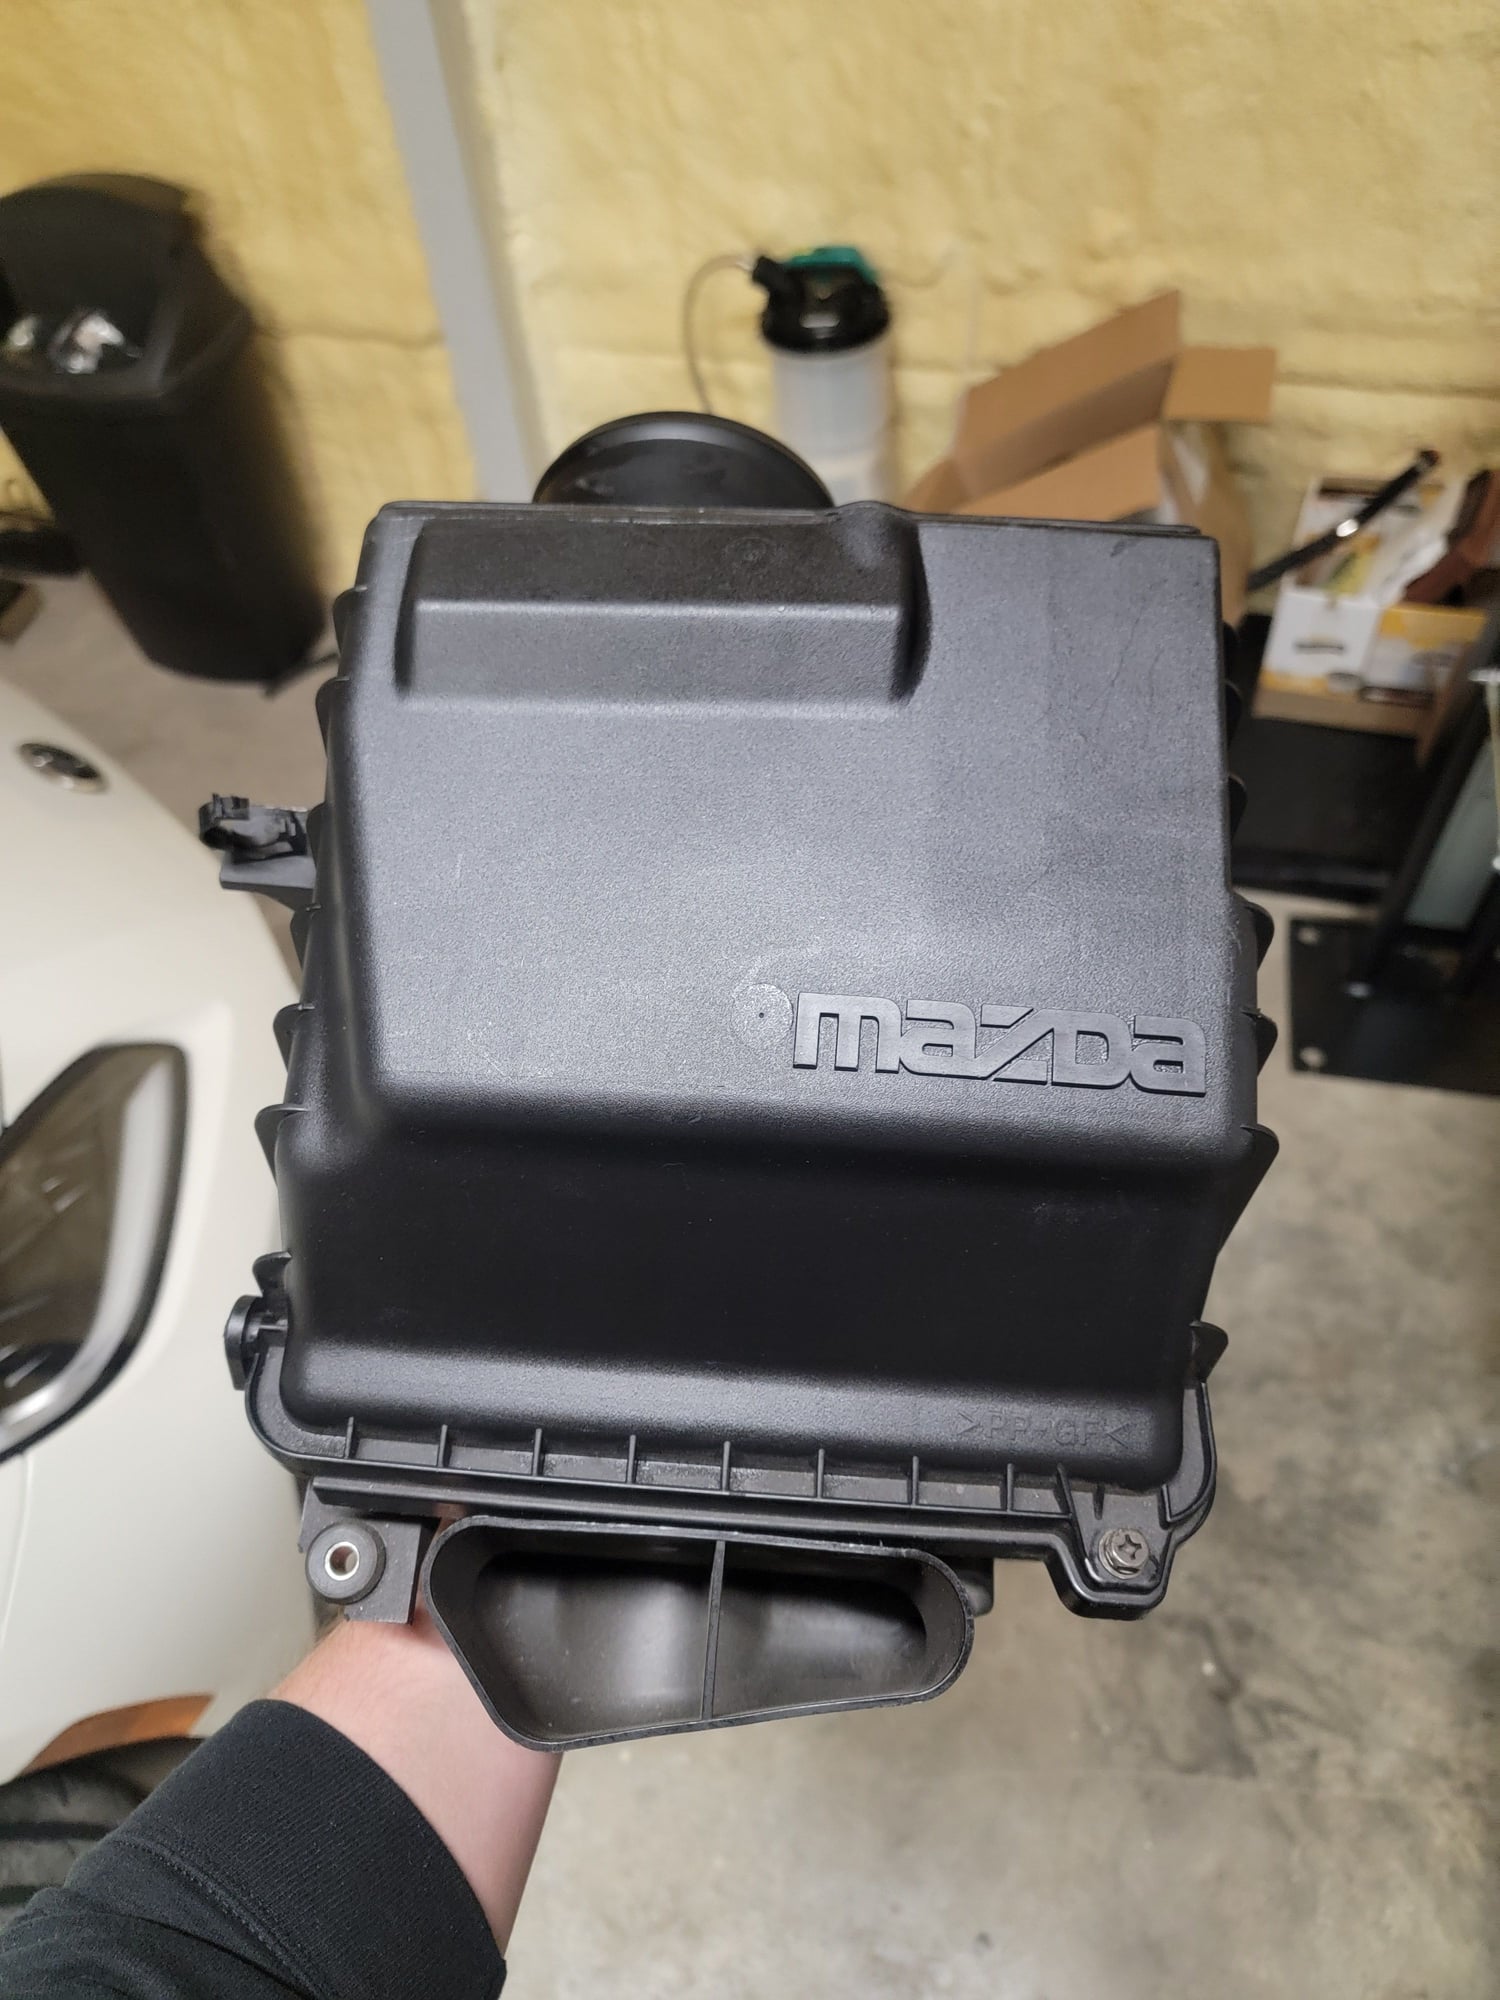 1994 Mazda RX-7 - Factory airbox converted for single turbo w cheap bastard mod - Engine - Intake/Fuel - $300 - West Harrison, IN 47060, United States